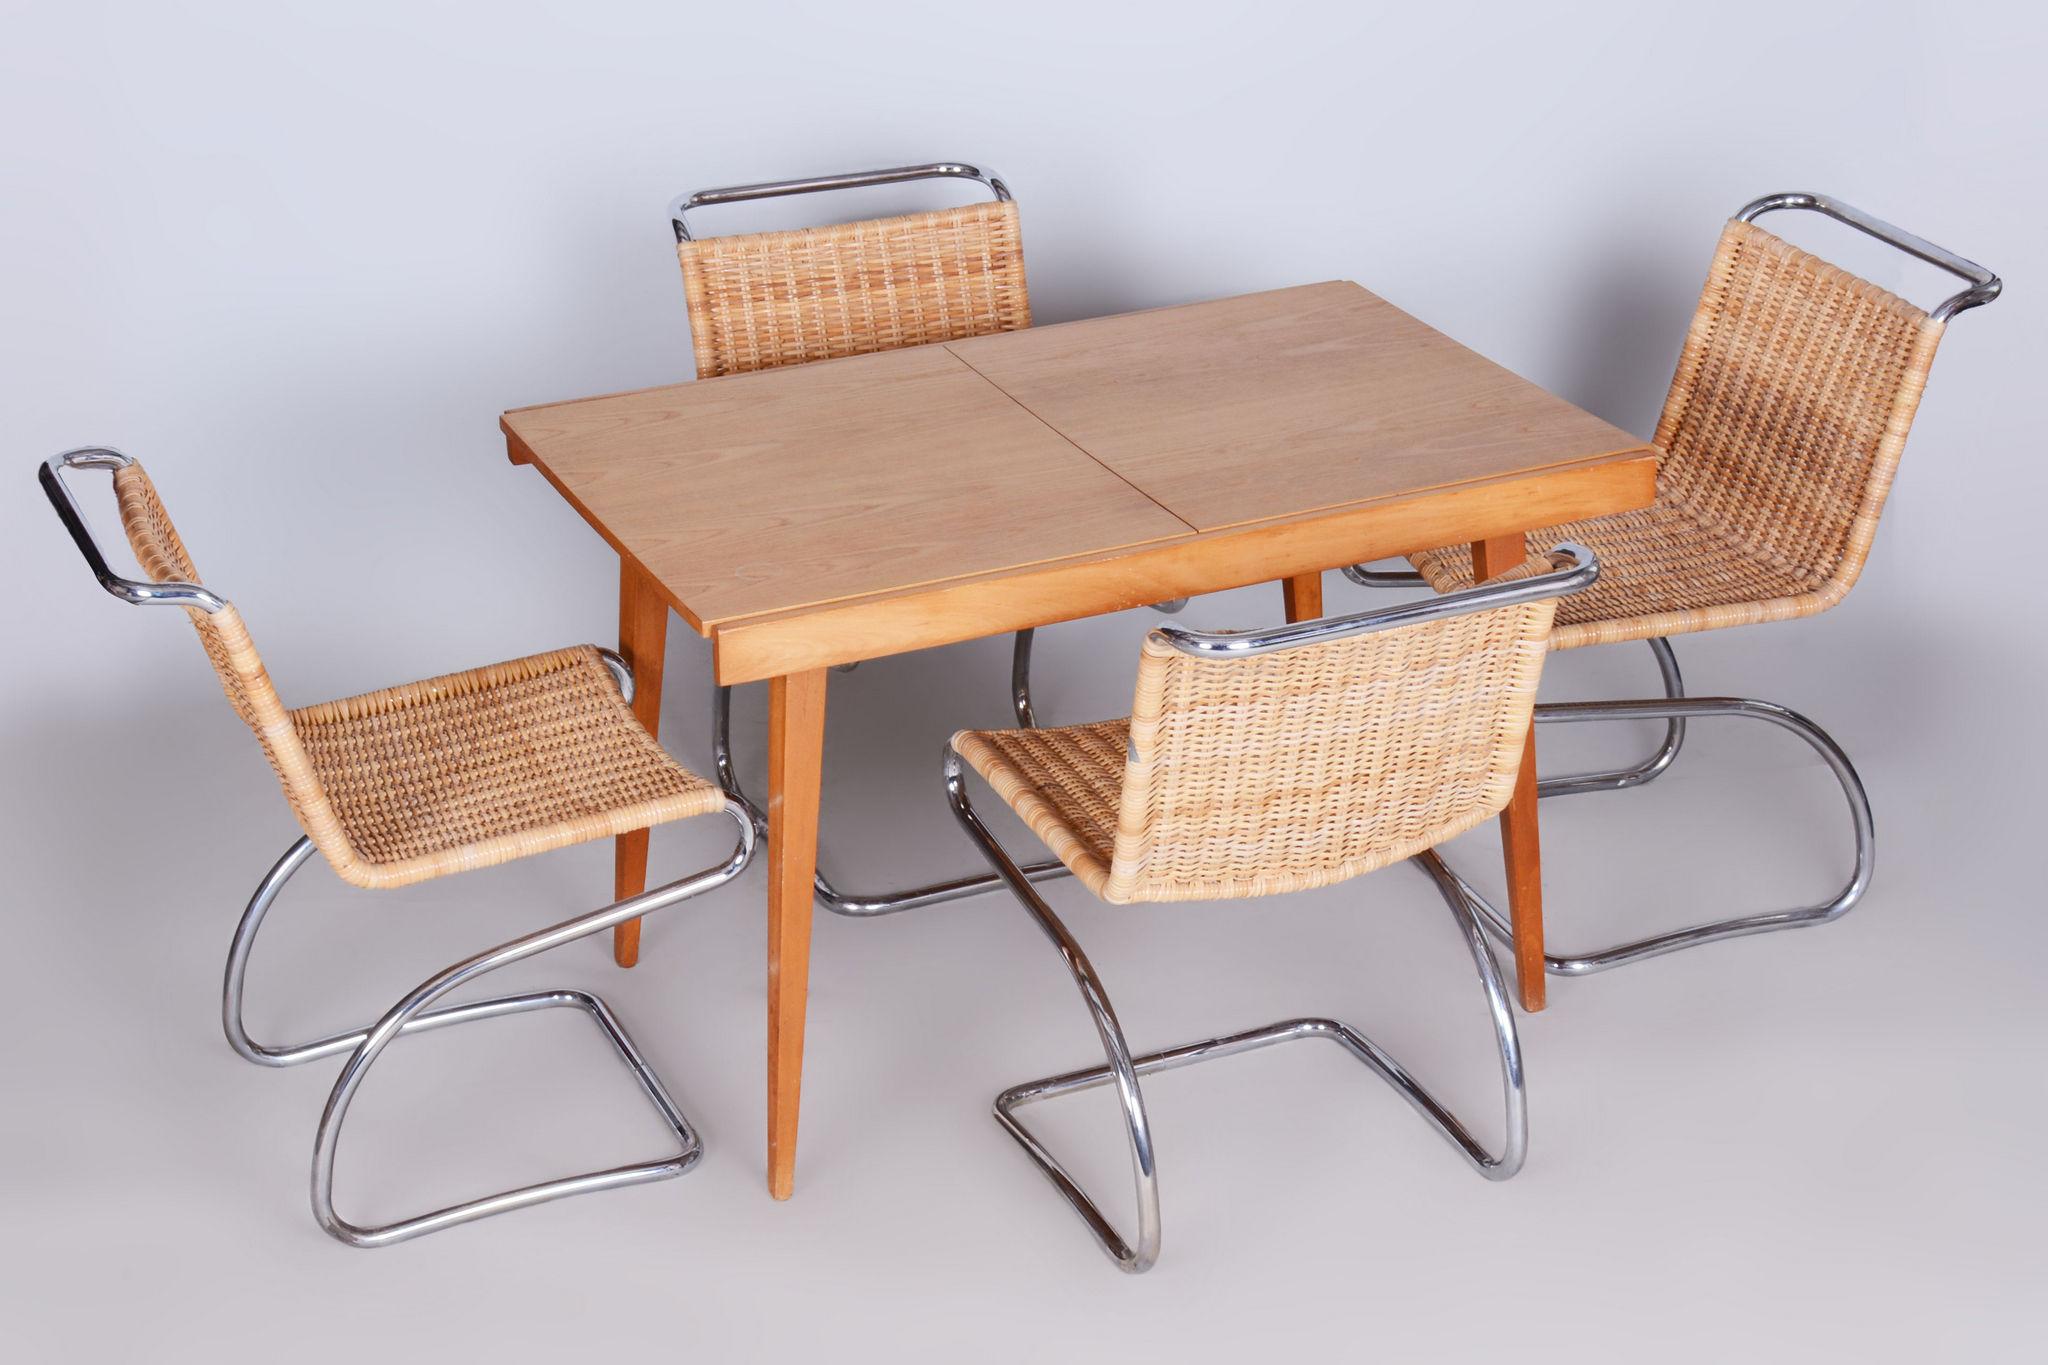 Restored Bauhaus Set of Four Chairs Deisgned By Jindrich Halabala.

Designer: Jindrich Halabala
Maker: UP Zavody
Material: Chrome-plated Steel, Rattan Strings
Source: Czechia (Czechoslovakia)
Period: 1930-1939

The chrome parts have been